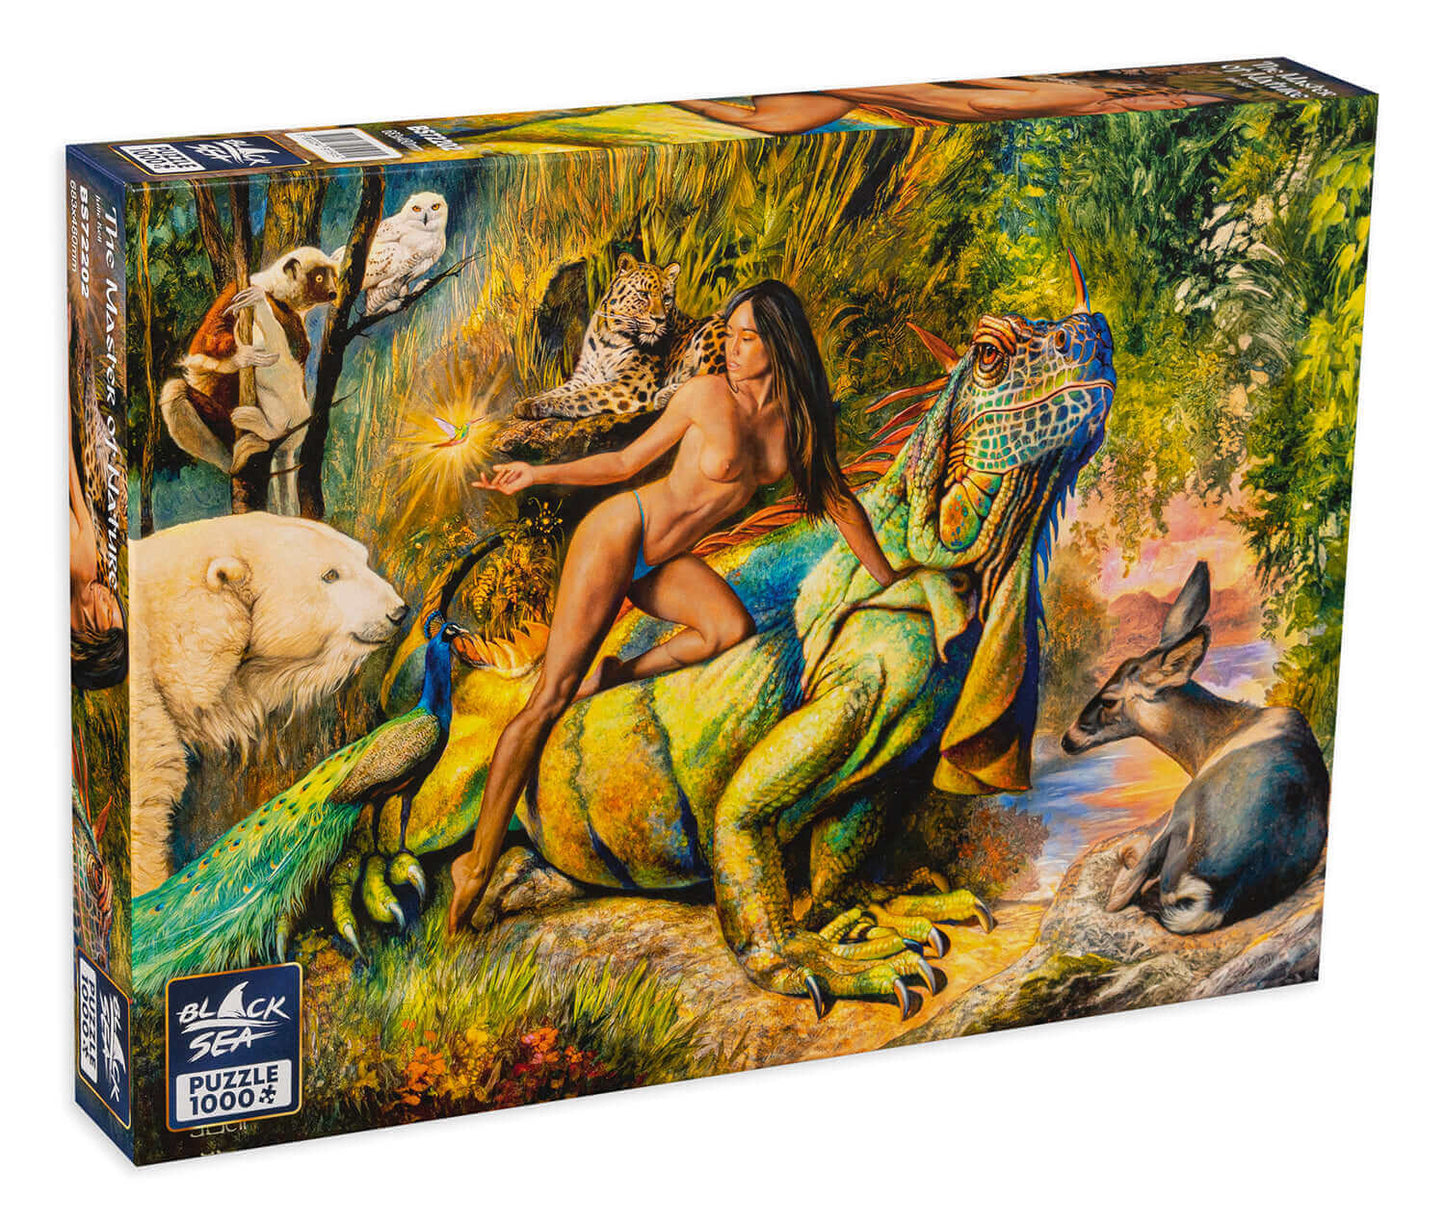 Puzzle Black Sea Premium 1000 pieces - The Master of Nature, Femininity and power, tenderness and dark passion, chaos and harmony, bravery and sin come together in the perfect symphony of a woman. As she walks, trees move aside to let her pass, animals kn